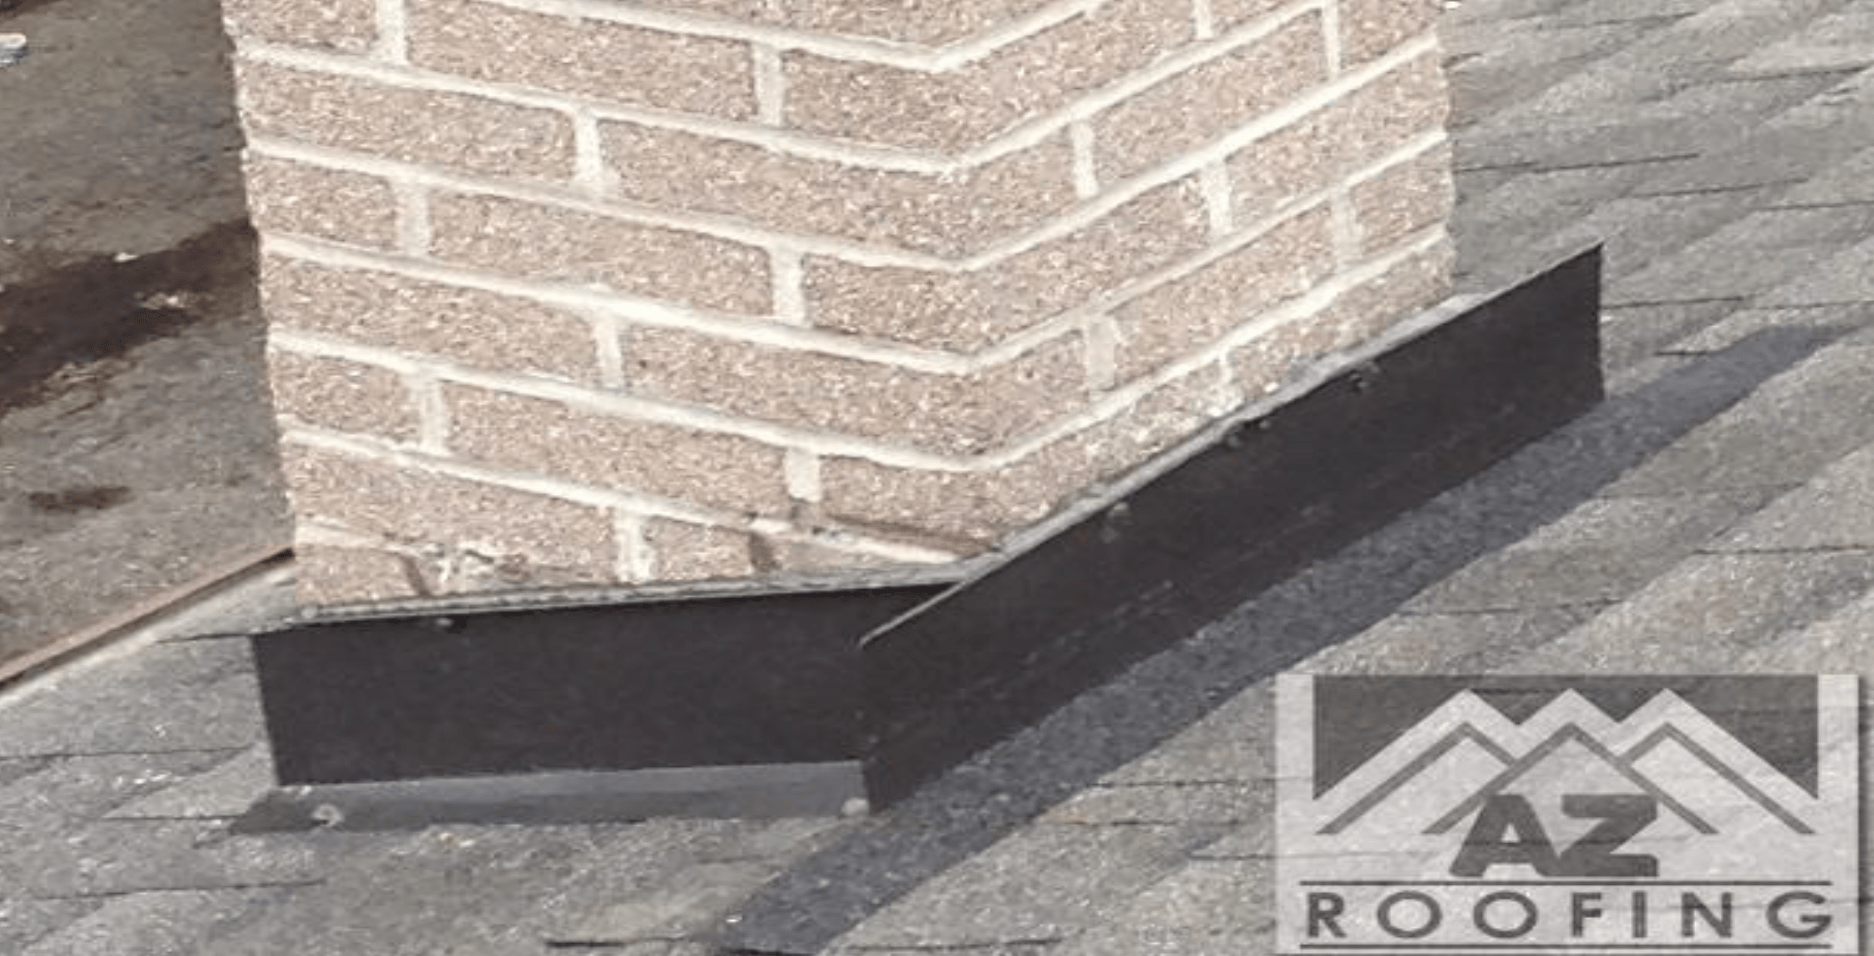 shingle roof replacement and installation process by AZRoofing with gutter fascia cleaning process at cheap rates